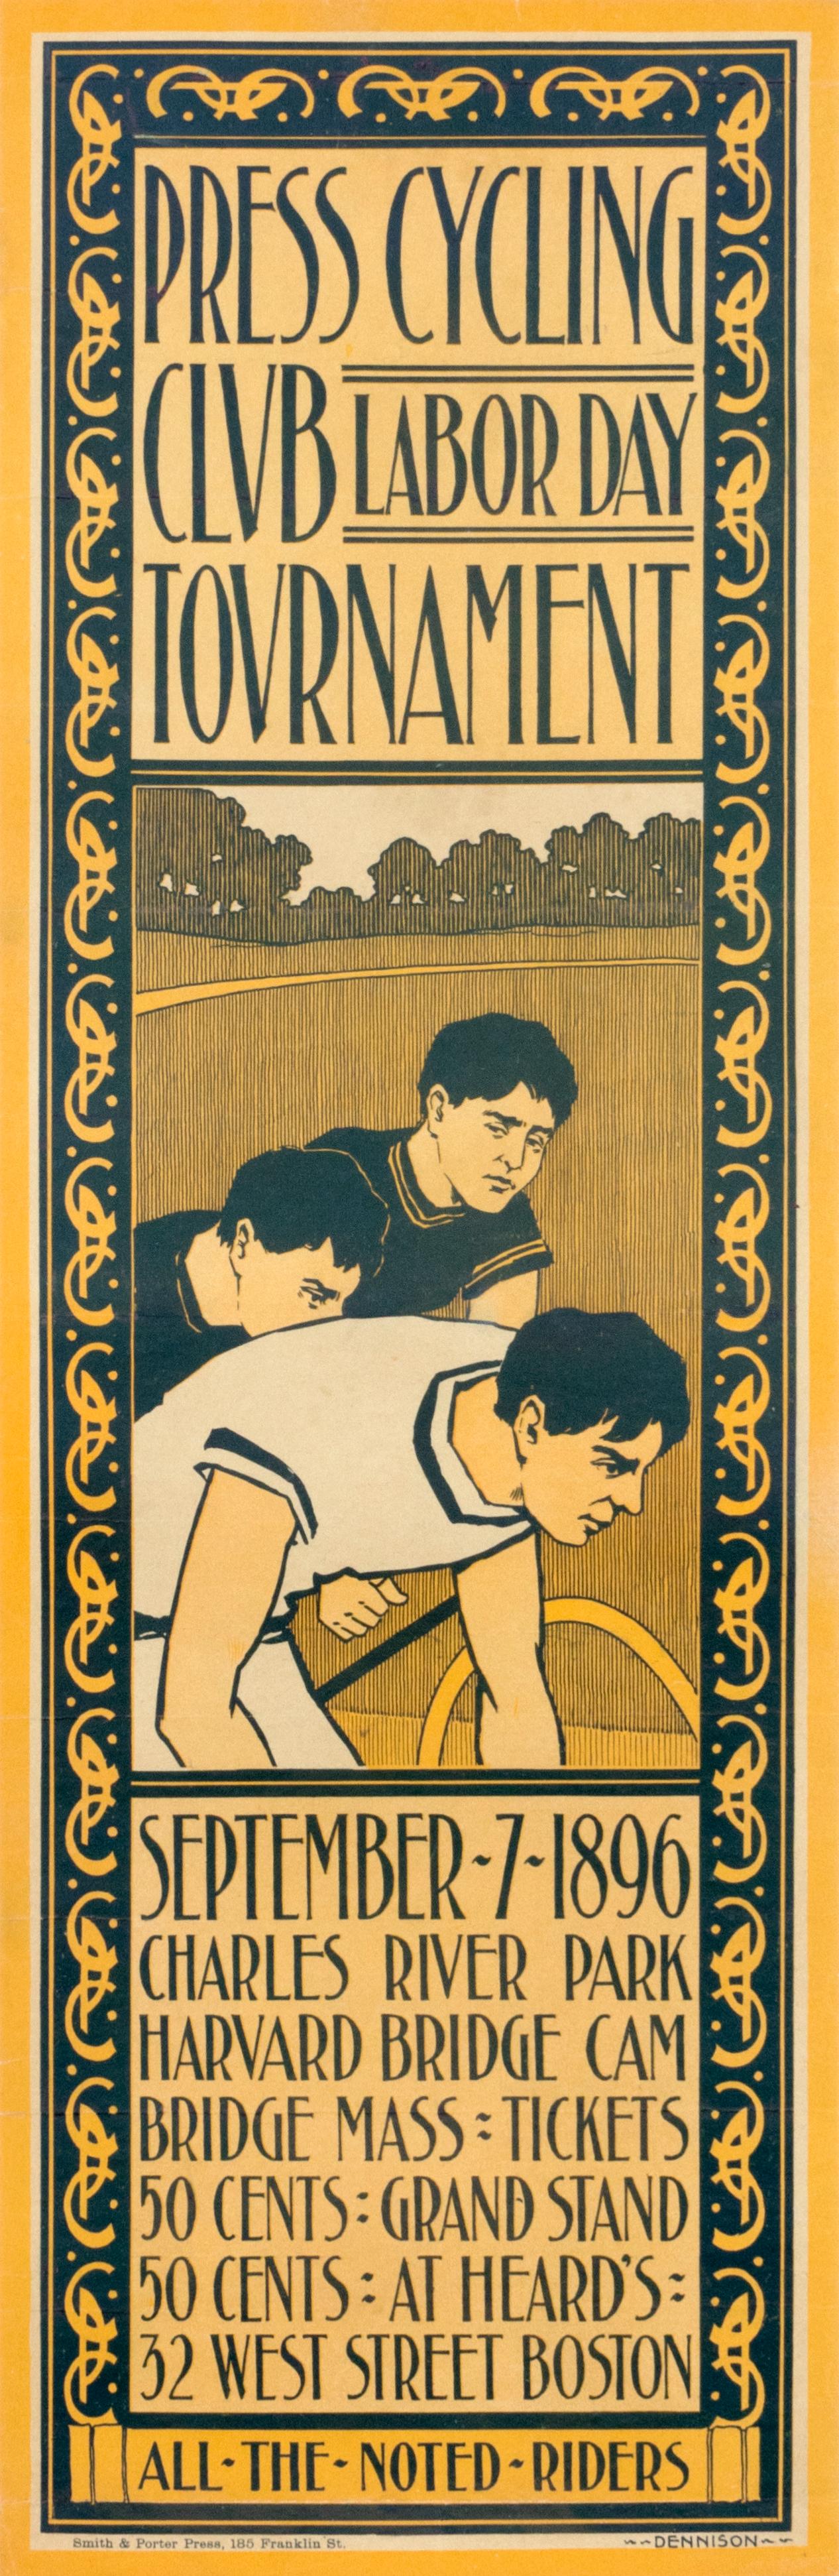 "Press Cycling Club - Labor Day Tournament" Original Vintage Cycling Poster 1896 - Print by Ethan Allen Dennison